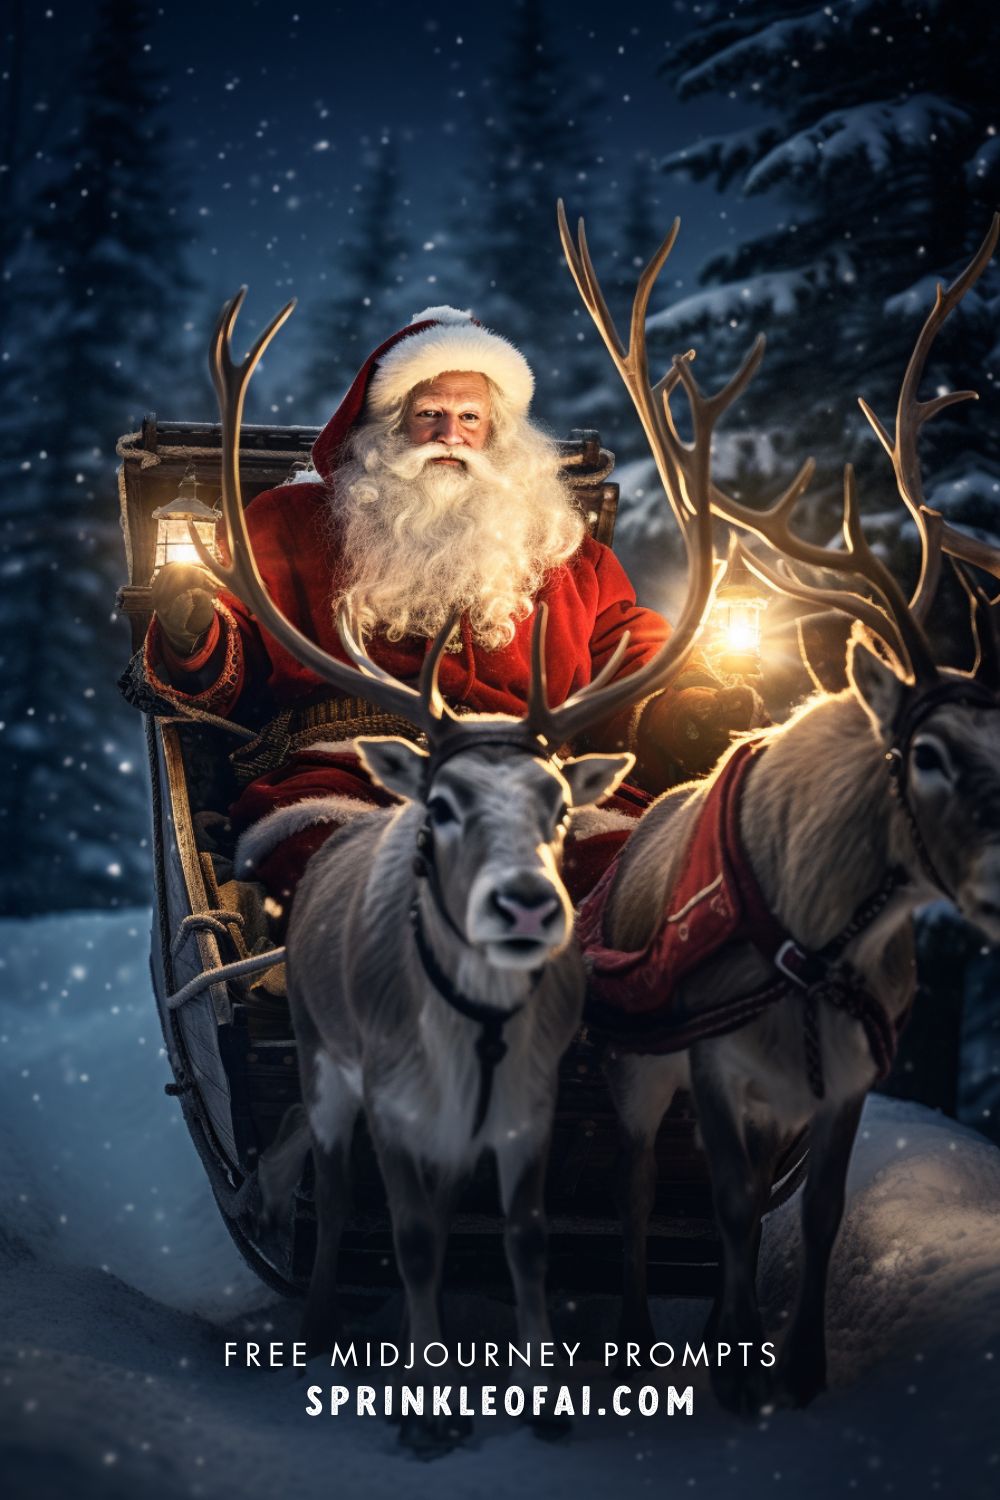 Best Midjourney Christmas Prompts for Festive Stock Photography - Midjourney Prompts for Christmas - Sprinkle of AI